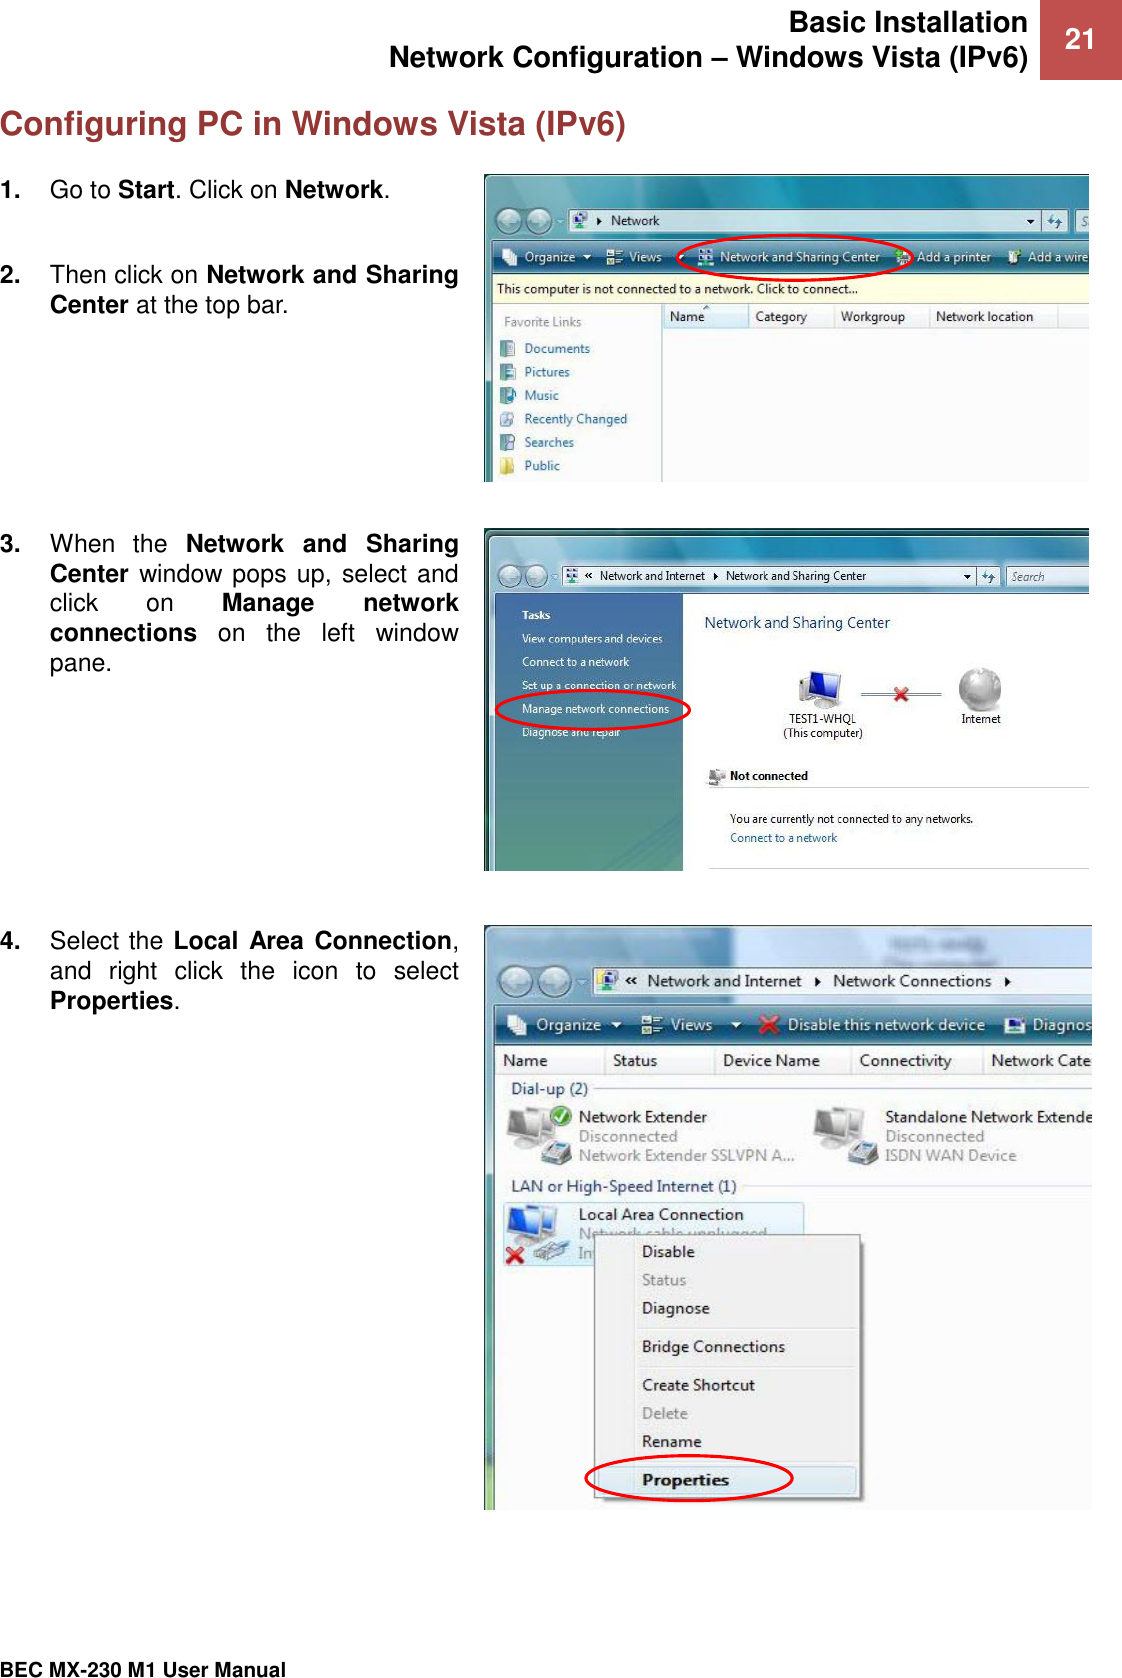 Basic Installation Network Configuration – Windows Vista (IPv6) 21   BEC MX-230 M1 User Manual  Configuring PC in Windows Vista (IPv6) 1. Go to Start. Click on Network.  2. Then click on Network and Sharing Center at the top bar.  3. When  the  Network  and  Sharing Center window pops up, select and click  on  Manage  network connections  on  the  left  window pane.  4. Select the Local  Area Connection, and  right  click  the  icon  to  select Properties.  